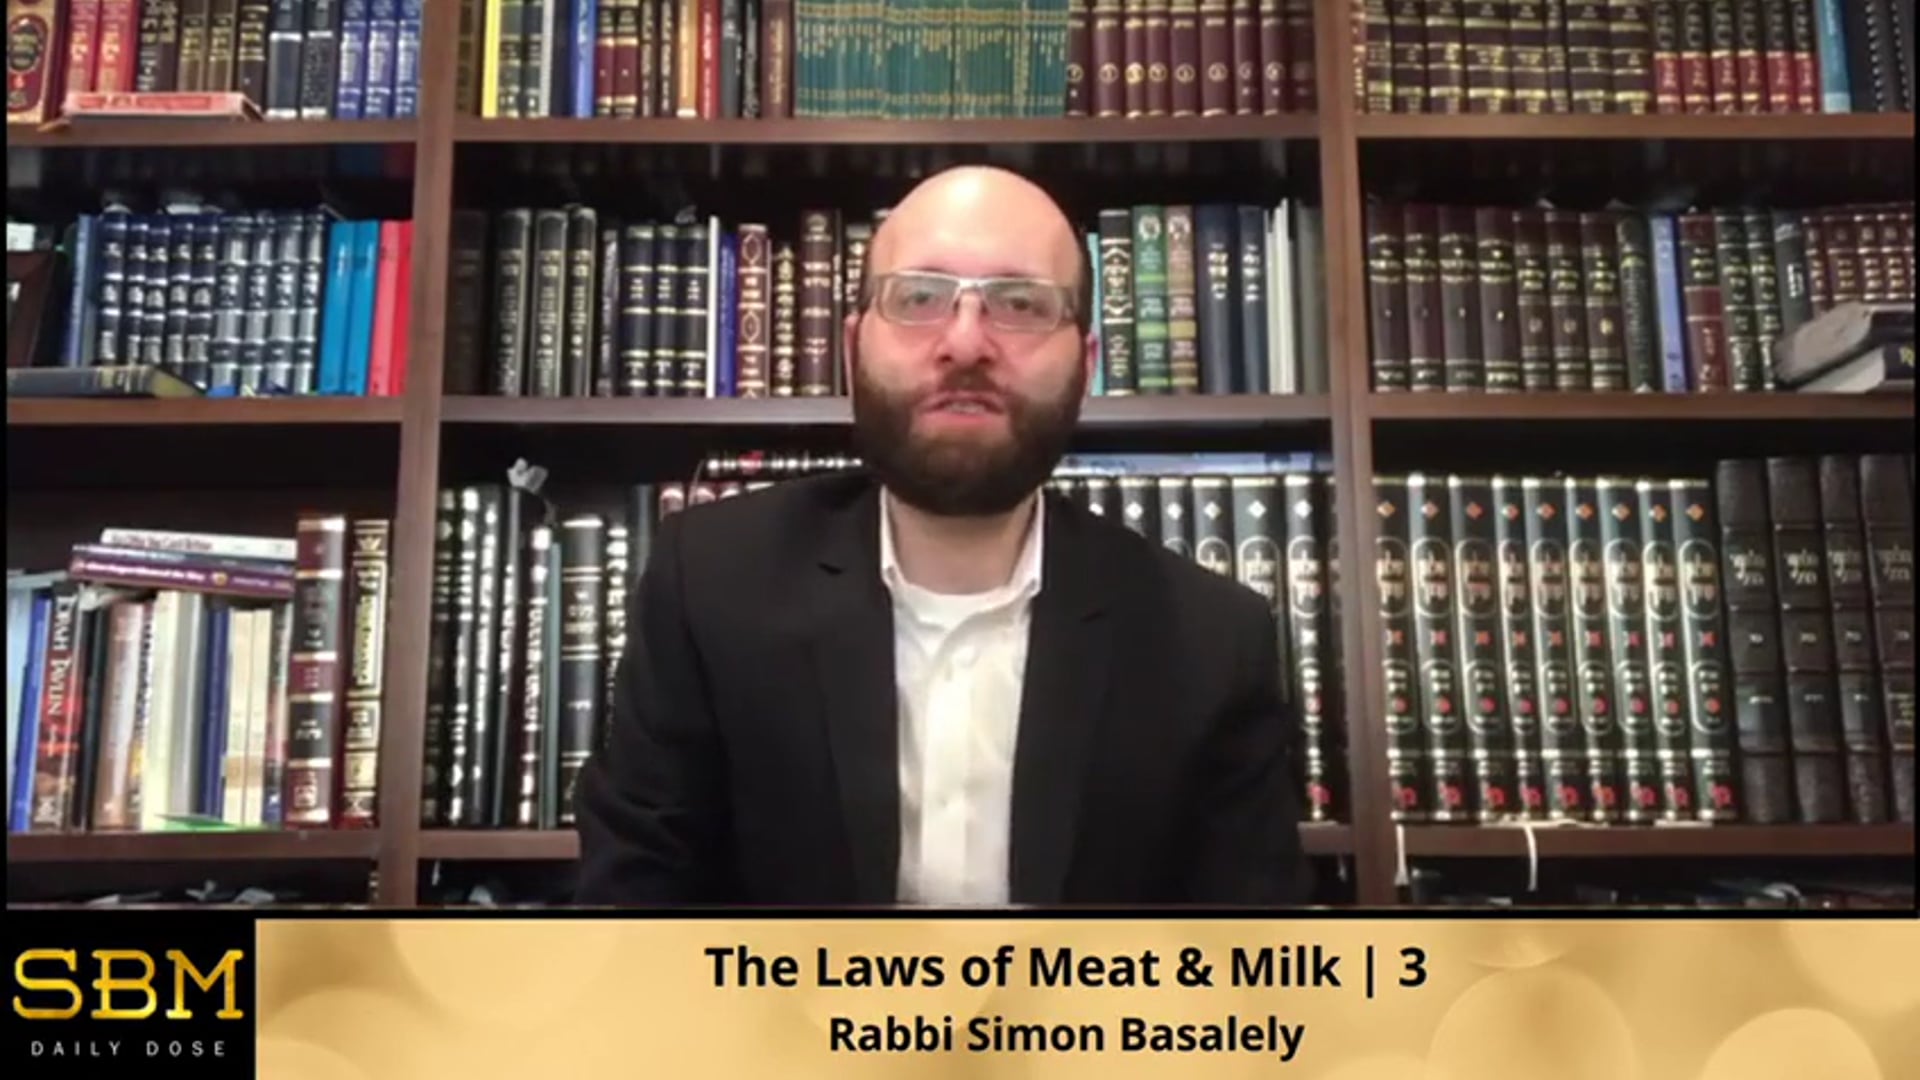 The Laws of Meat & Milk | 3 - Rabbi Simon Basalely